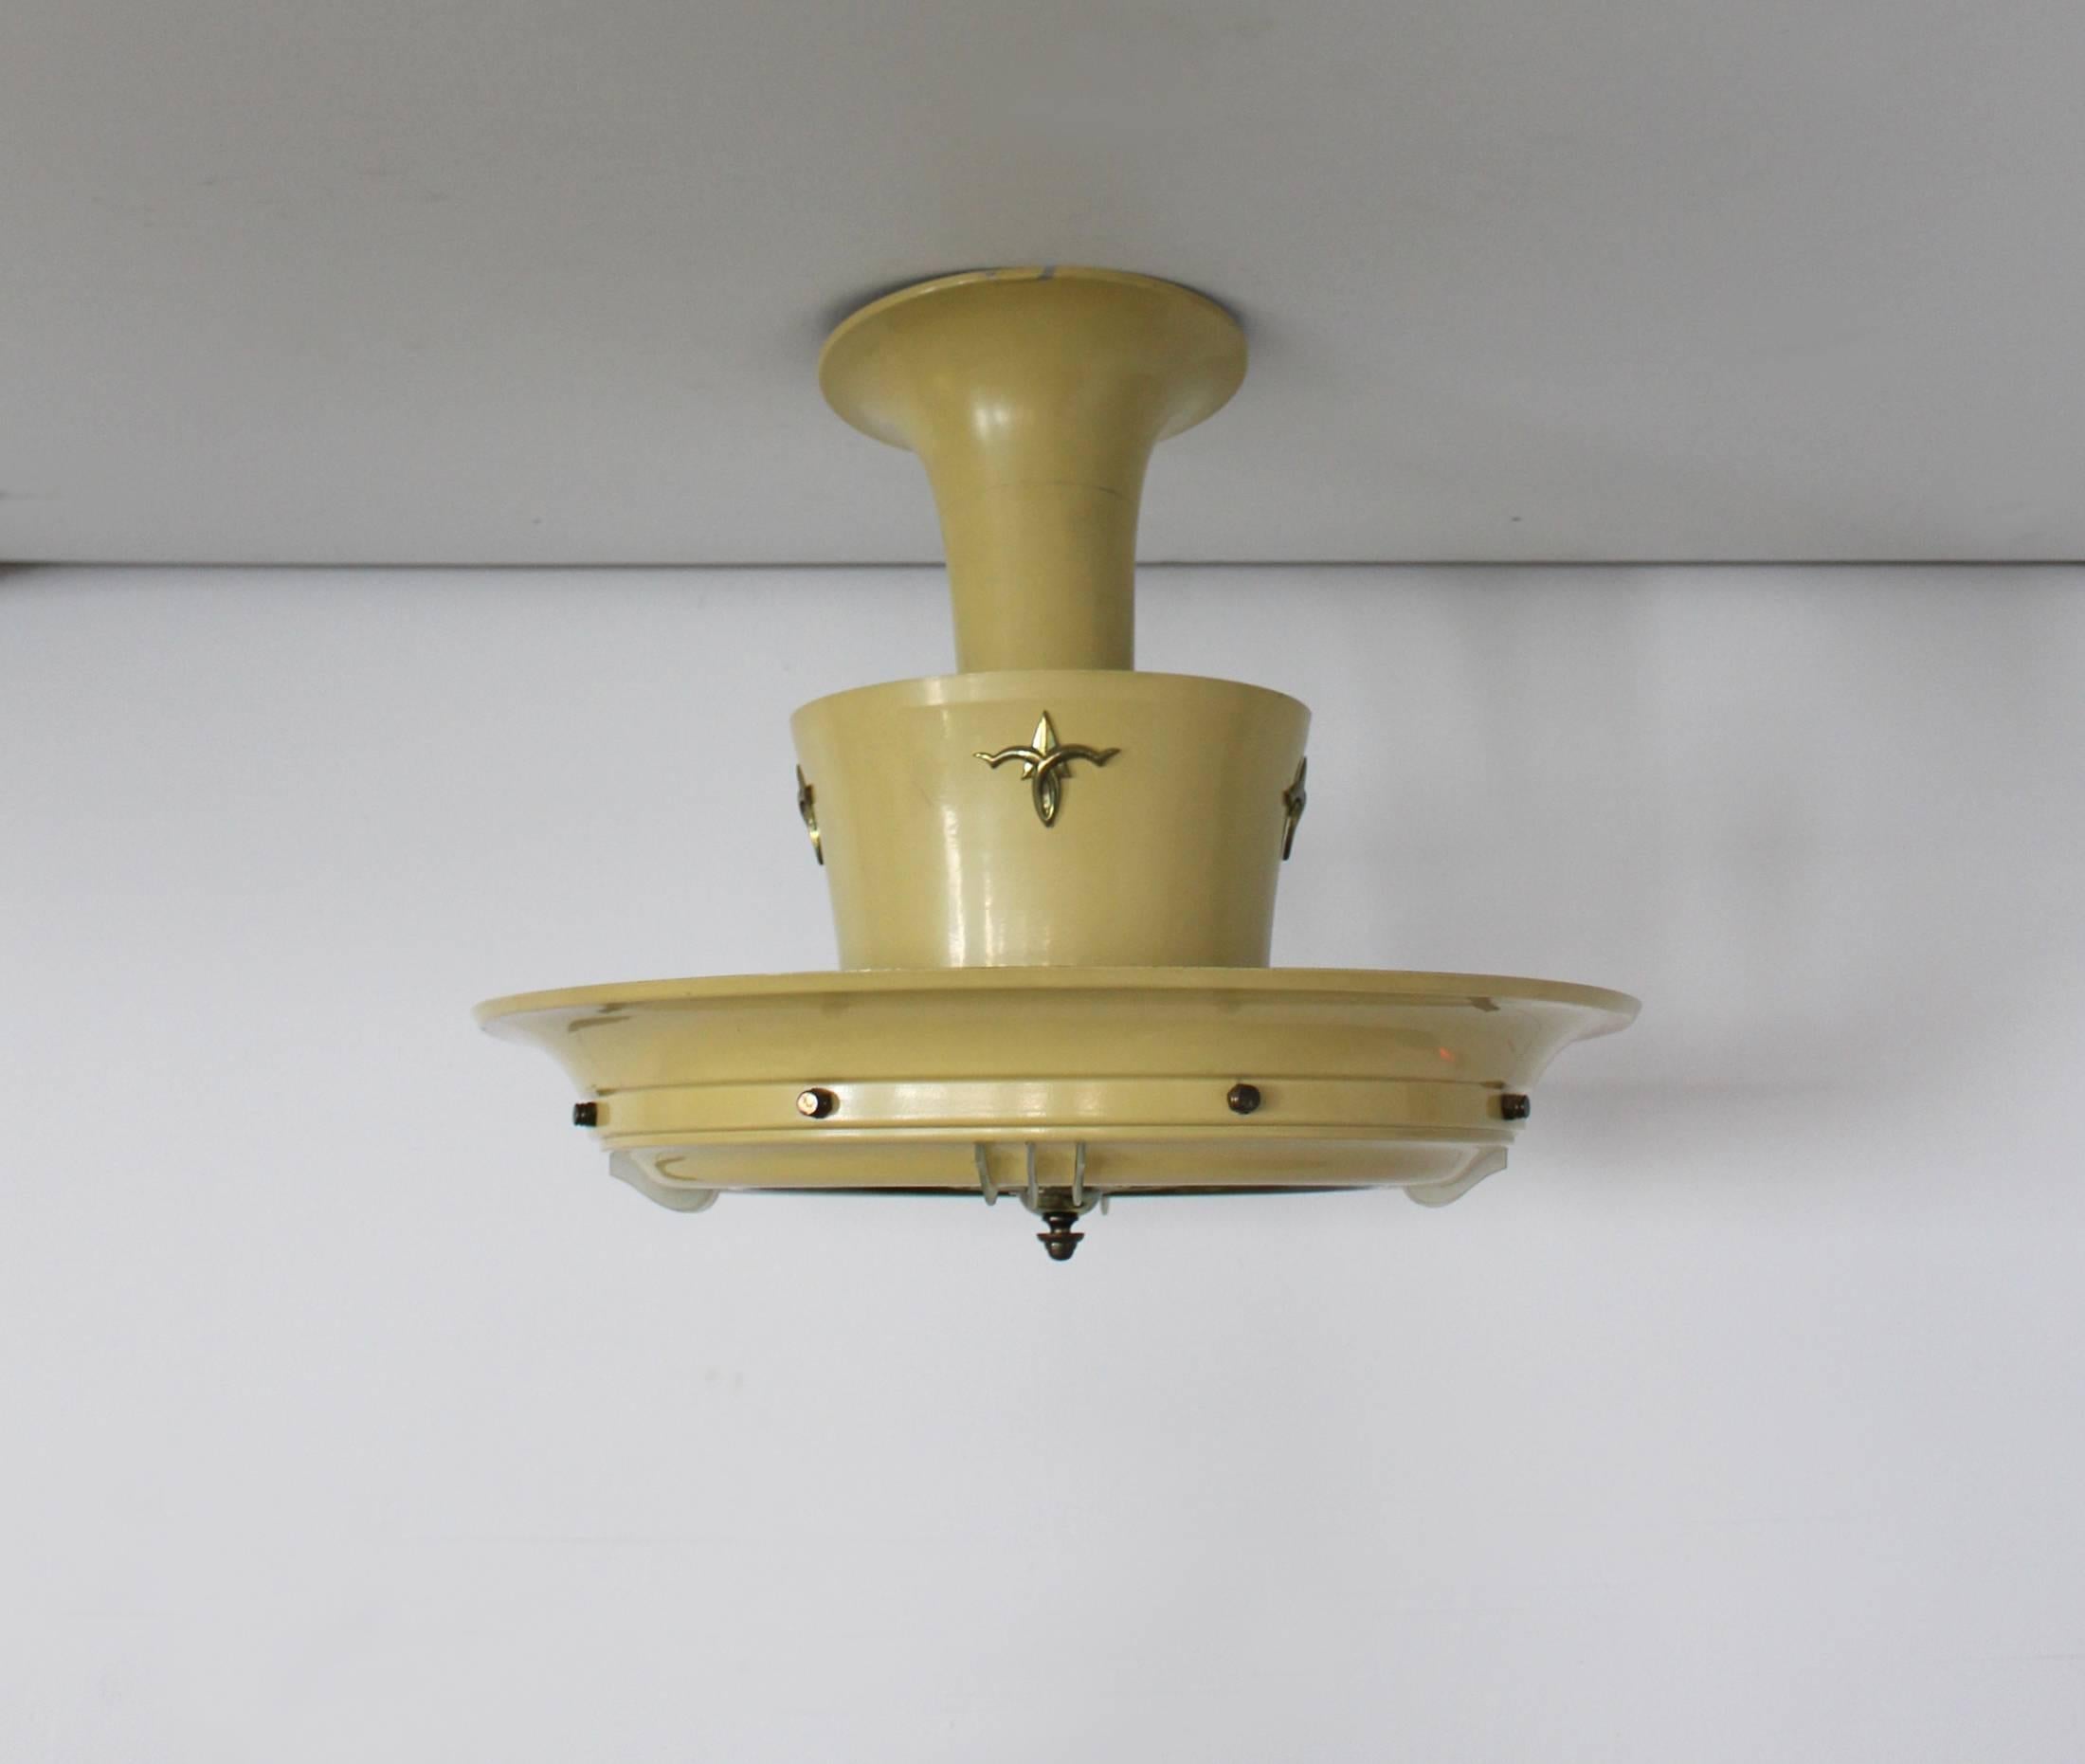 A midcentury round French pale yellow lacquered metal chandelier with a frosted glass diffuser and matching blades decorated with brass details and a center brass rosette.